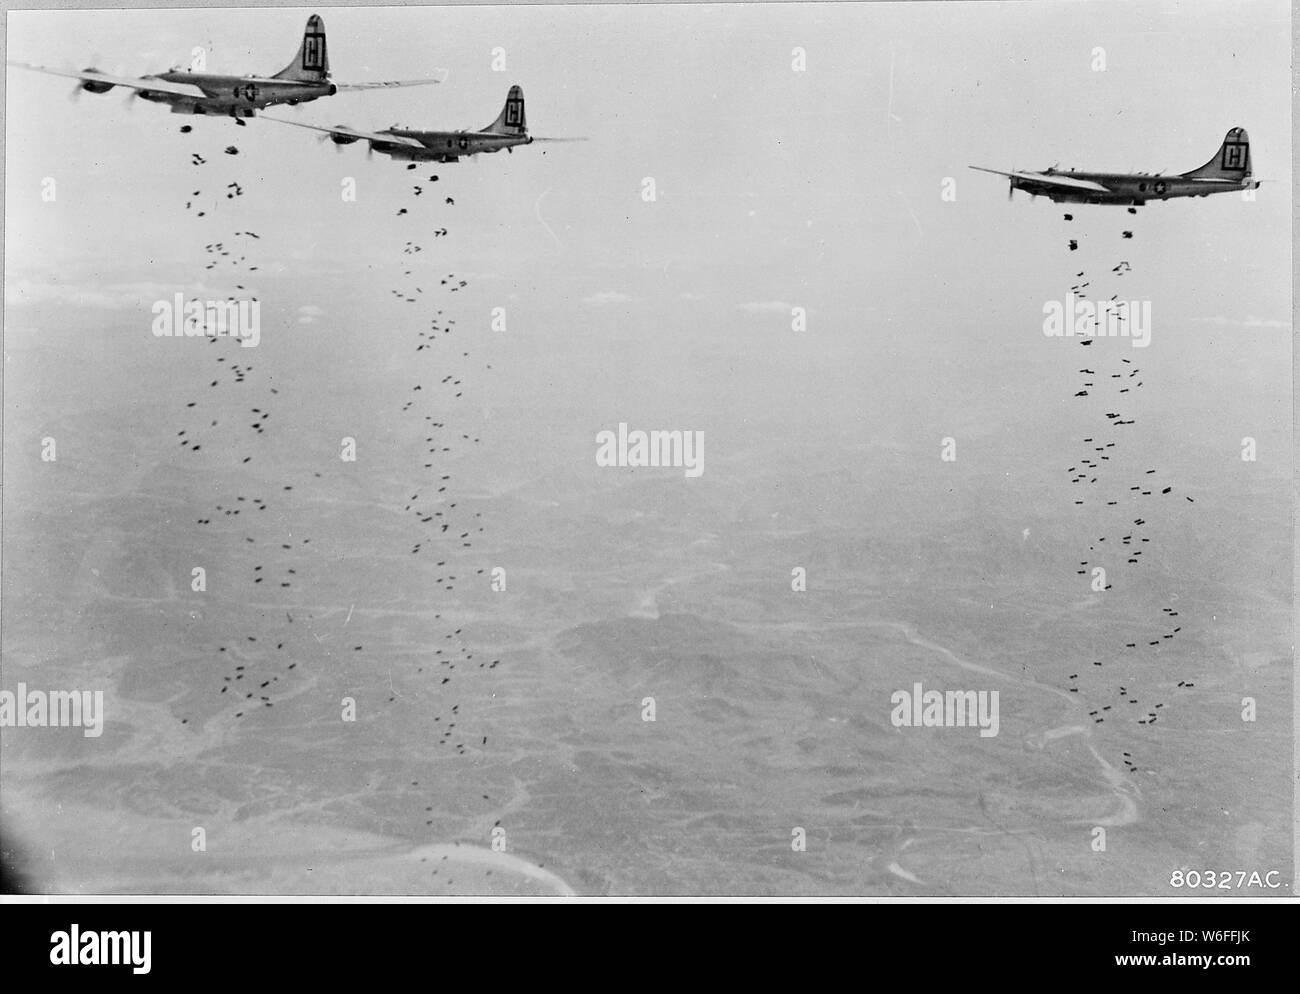 Bomber Command planes of the U.S. Far East Air Forces rain tons of bombs on a strategic military target of the Chinese Communists in North Korea. As part of the stepped-up aerial offensive against the enemy, attacks such as this are staggering the Reds, thus helping UN ground forces to stem the Communist push down the center of the Korean peninsula. The planes blasting the Red hordes are B-29 Superfort medium bombers. Stock Photo